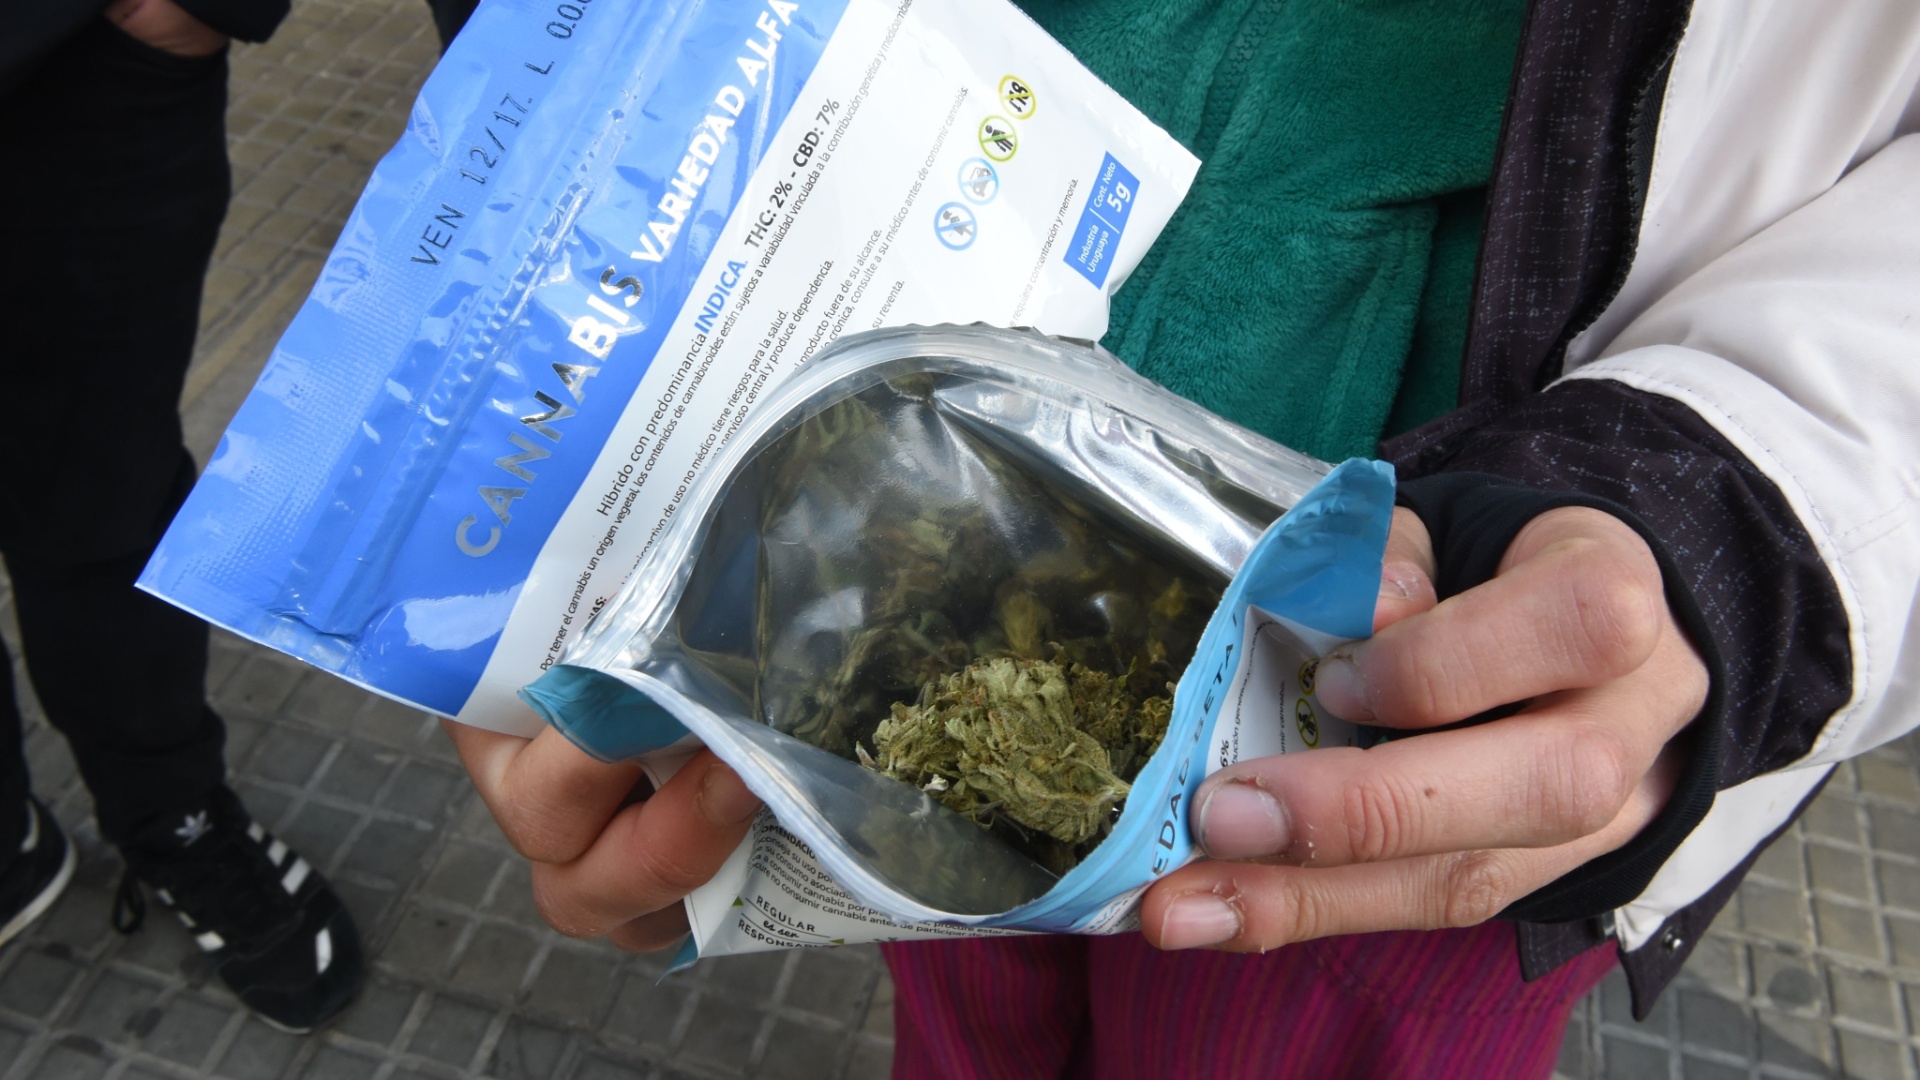 A marijuana consumer in Uruguay can withdraw up to 40 grams per month, equivalent to several "joints" per month.